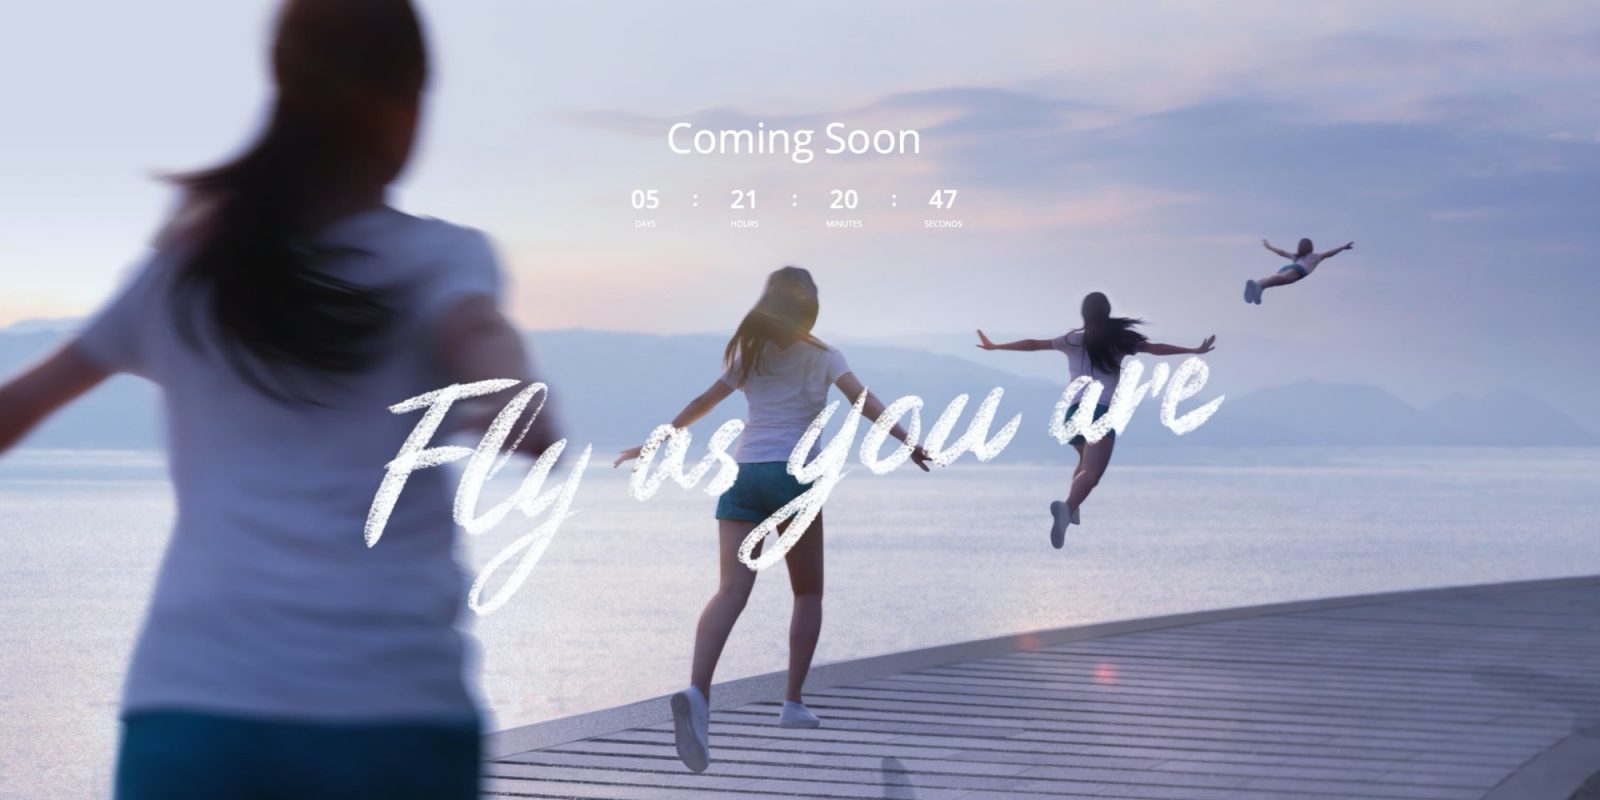 DJI's announcement: Fly as you are! - 9am EDT, October 30th